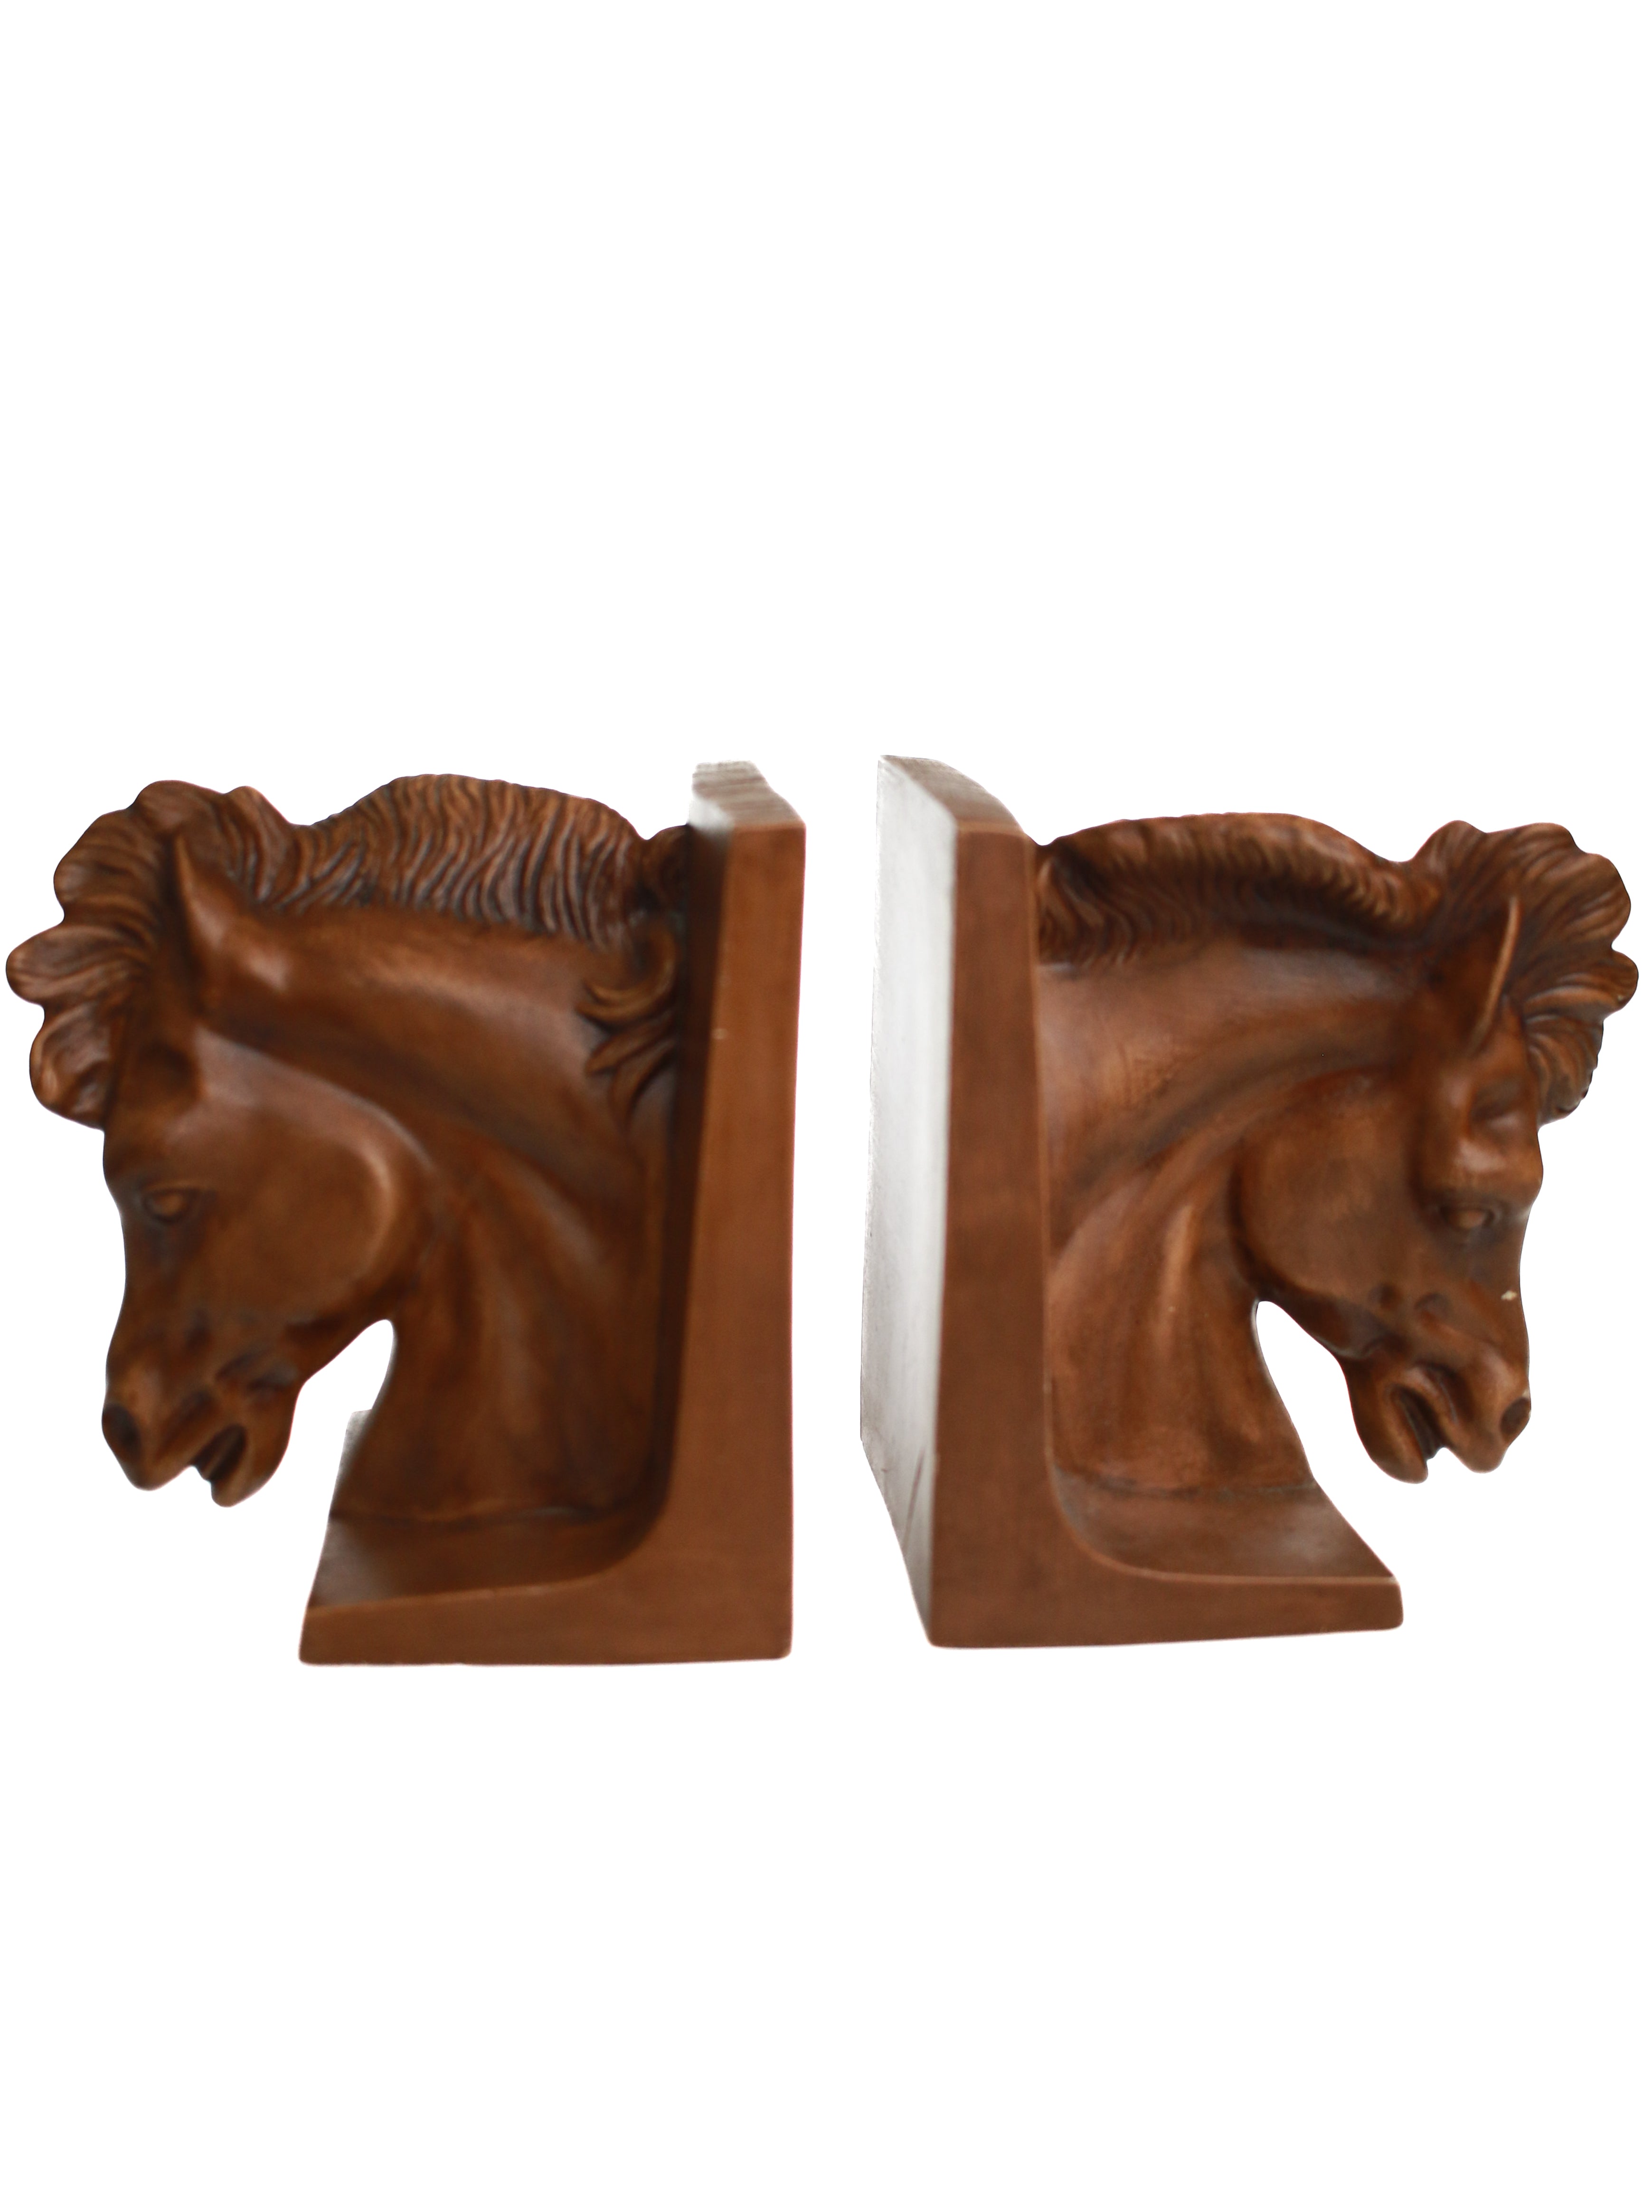 Whit's Vintage Picks | 70's Horsehead Bookends